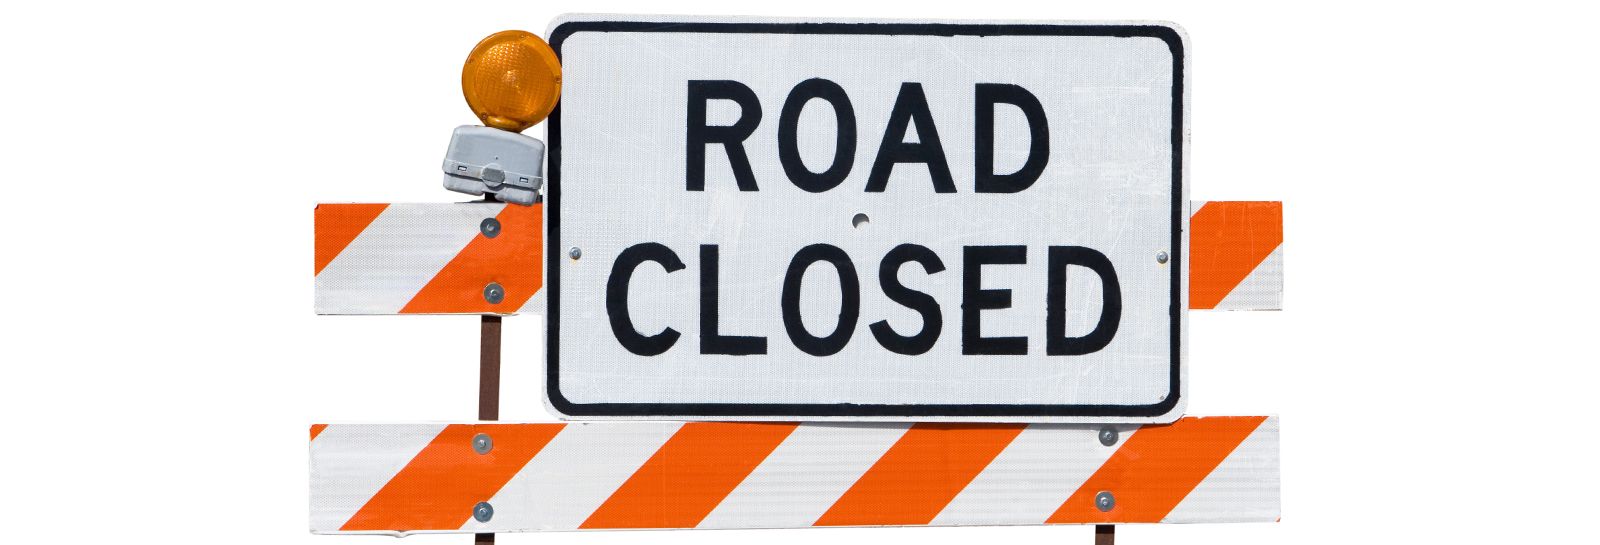 Closed road banner image